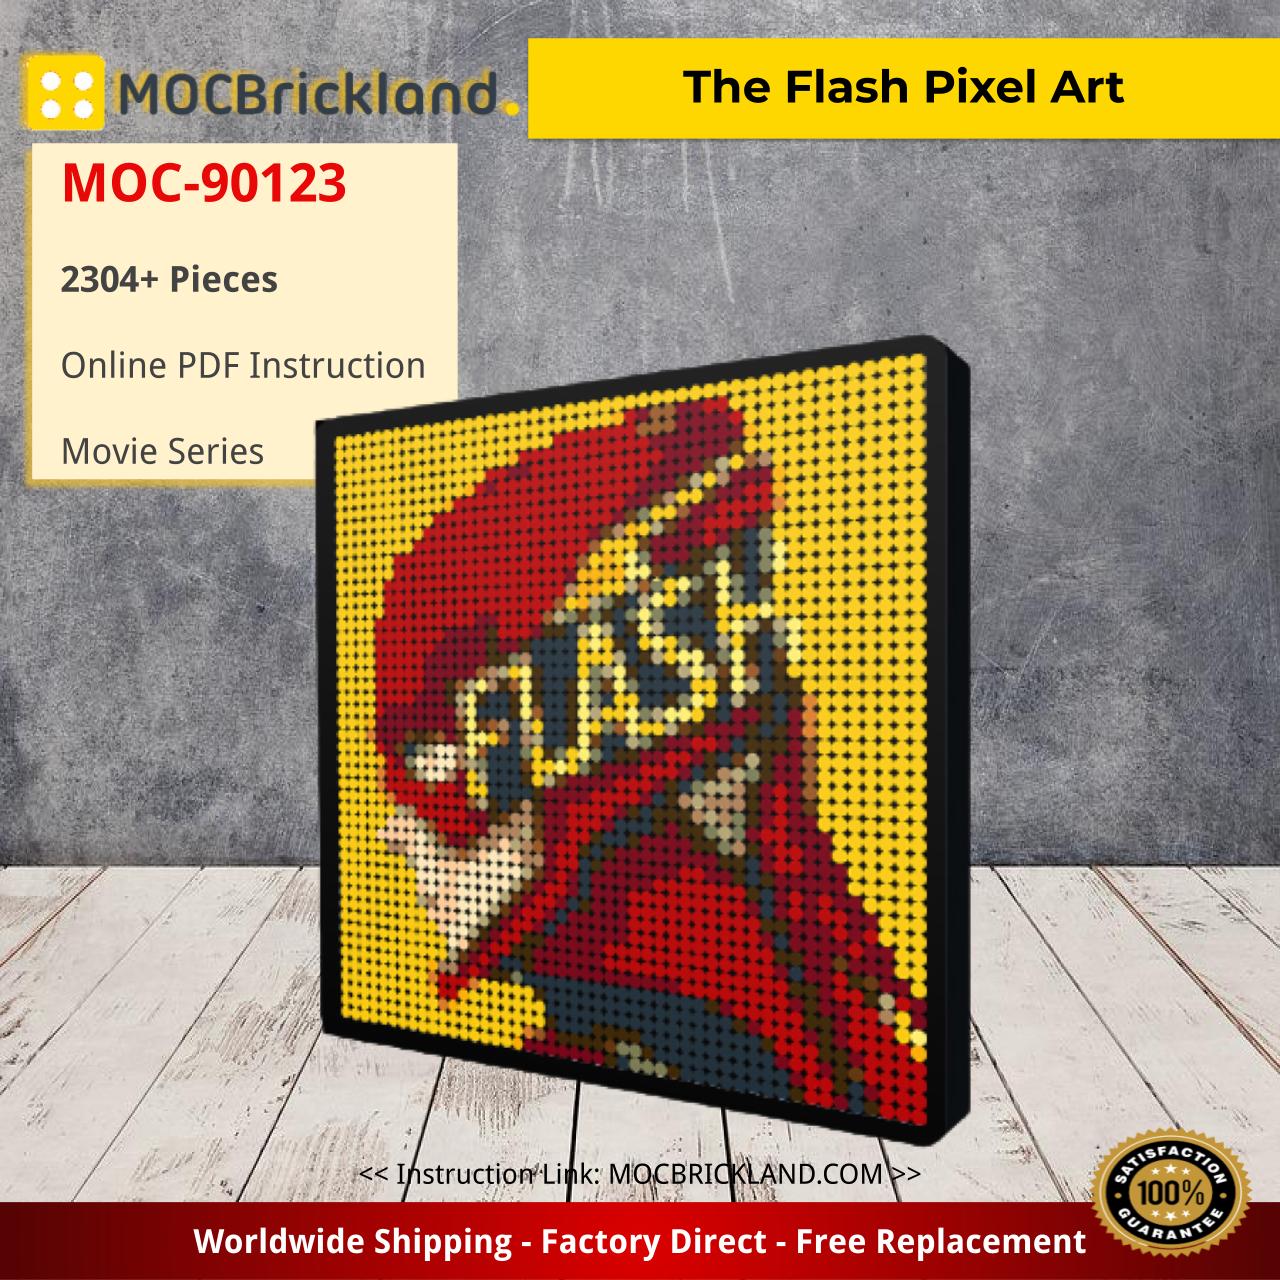 The Flash Pixel Art Movie MOC-90123 with 2304 Pieces